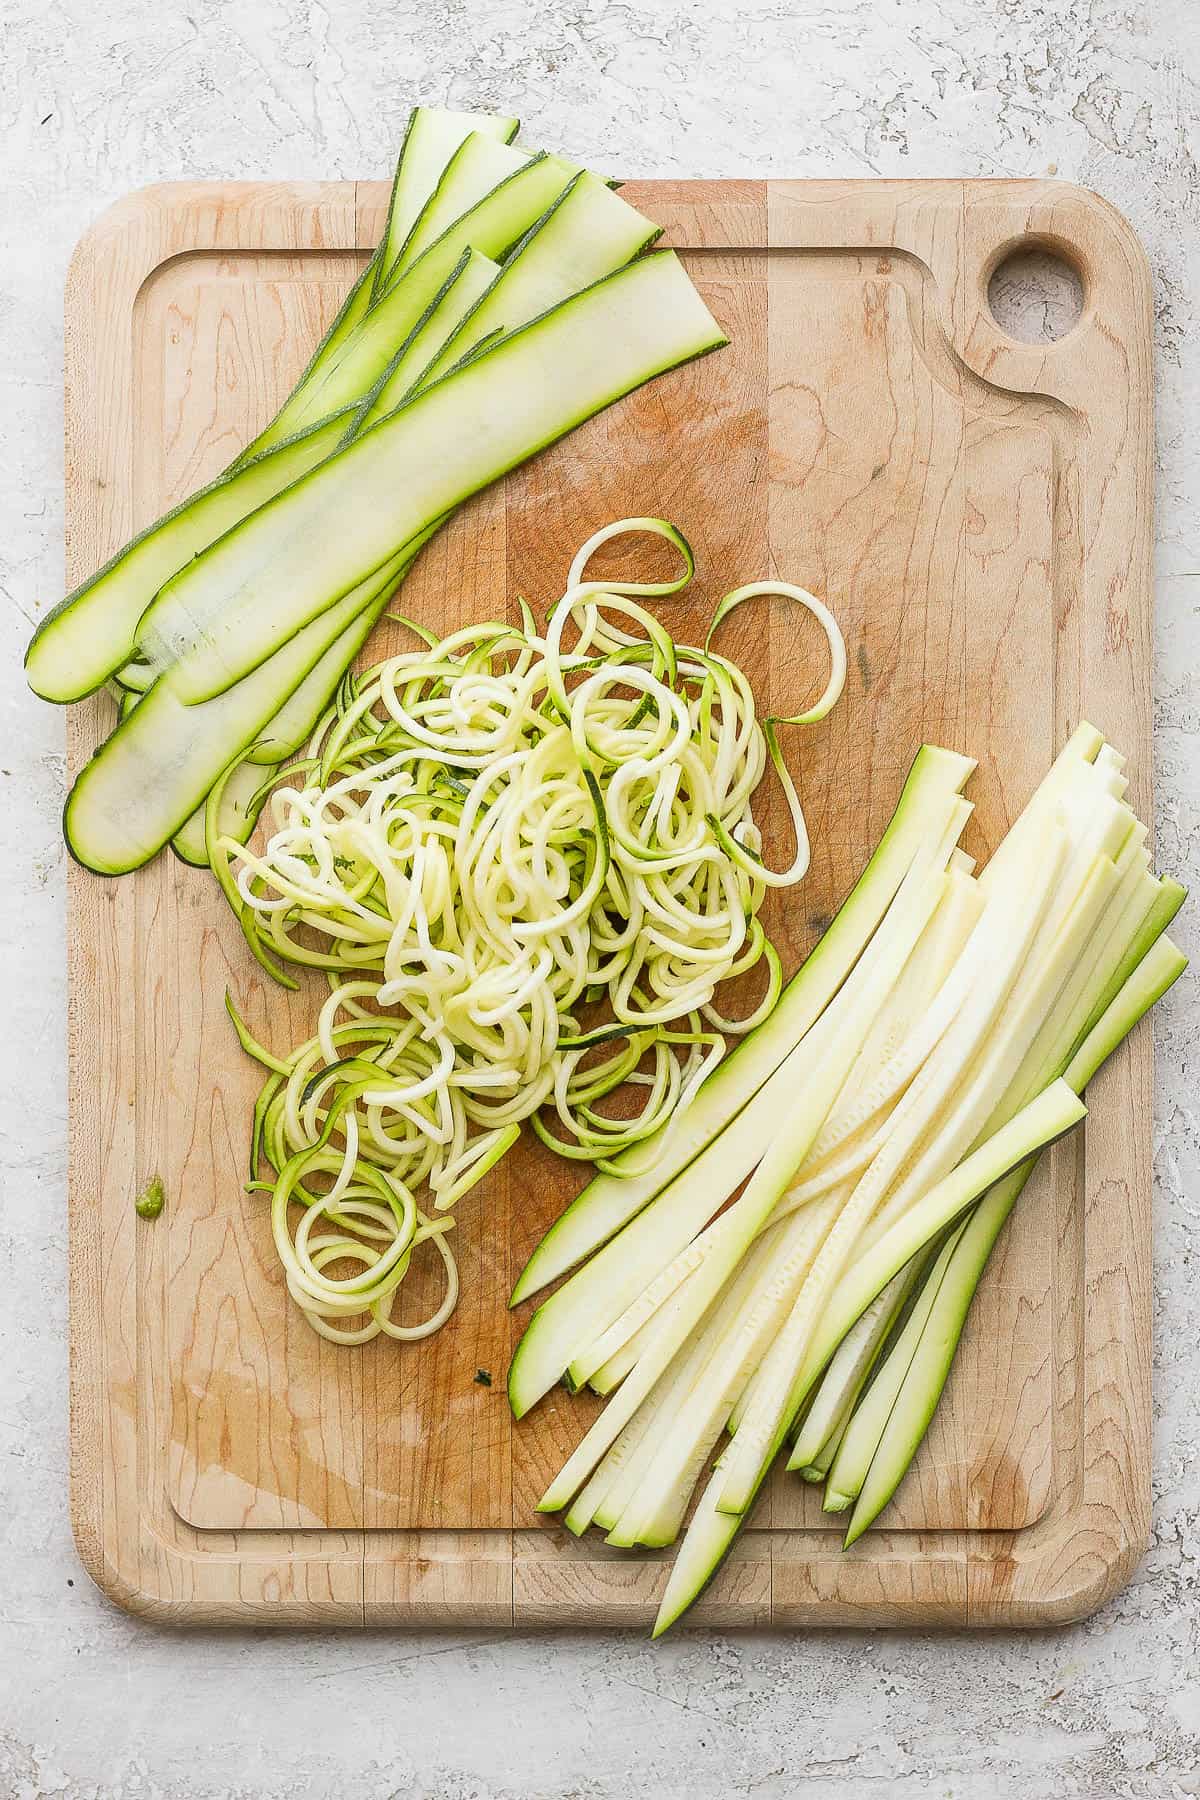 3 types of zucchini noodles